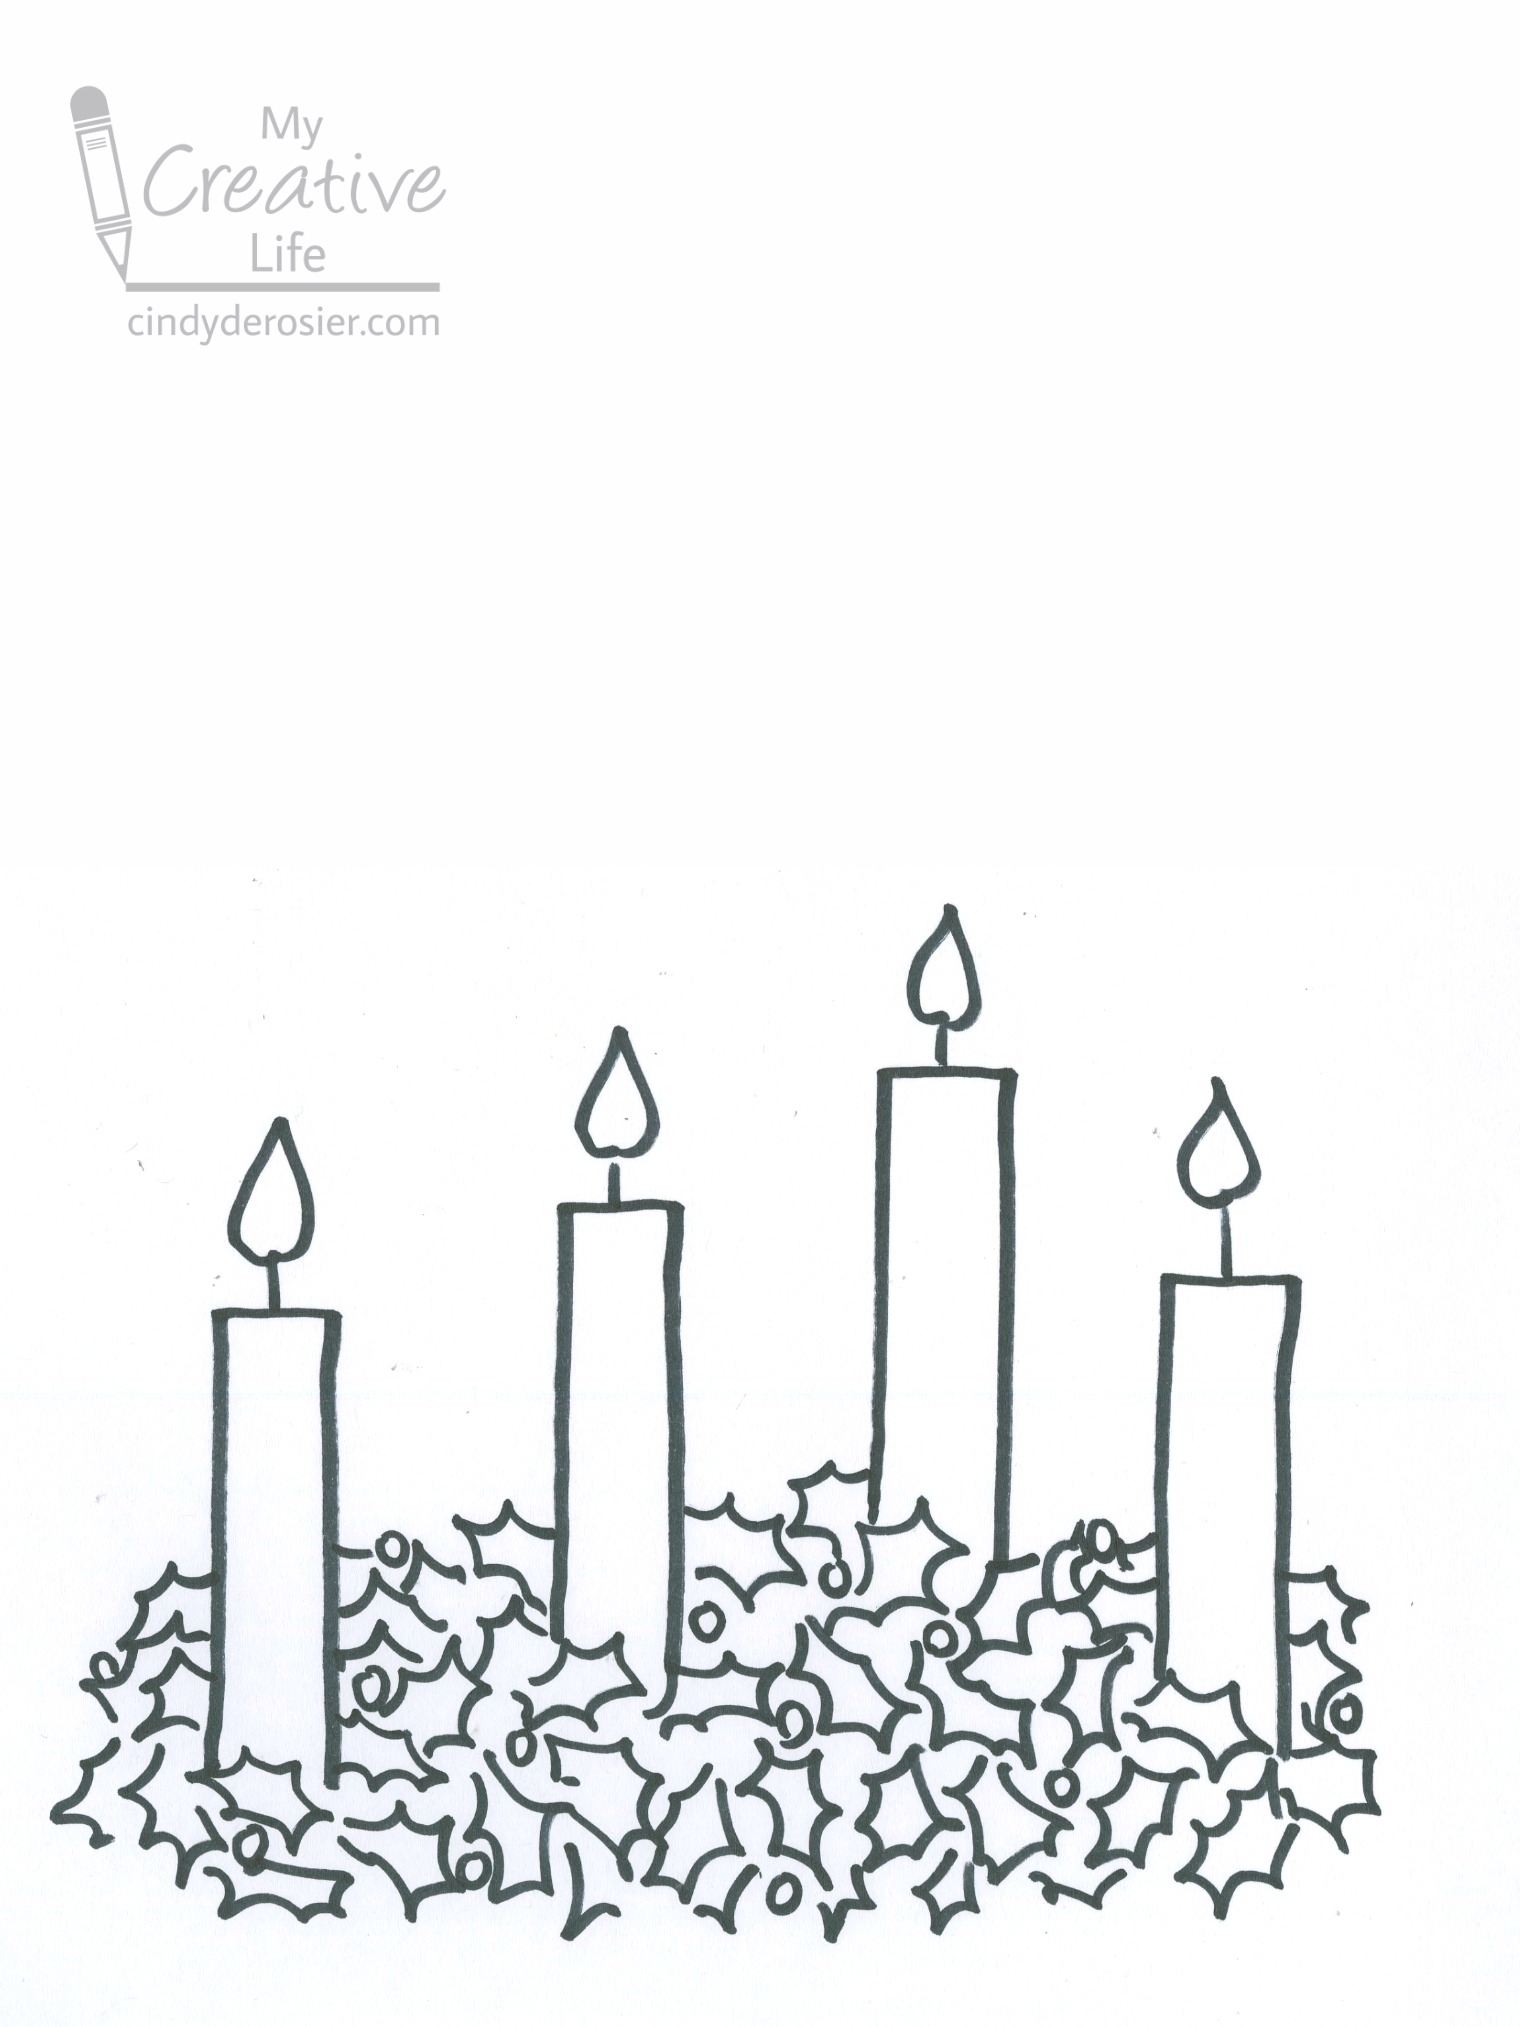 Advent Wreath Coloring Page With Candle Names & Meanings -  TheCatholicKid.com | Advent coloring, Advent coloring sheets, Advent wreath